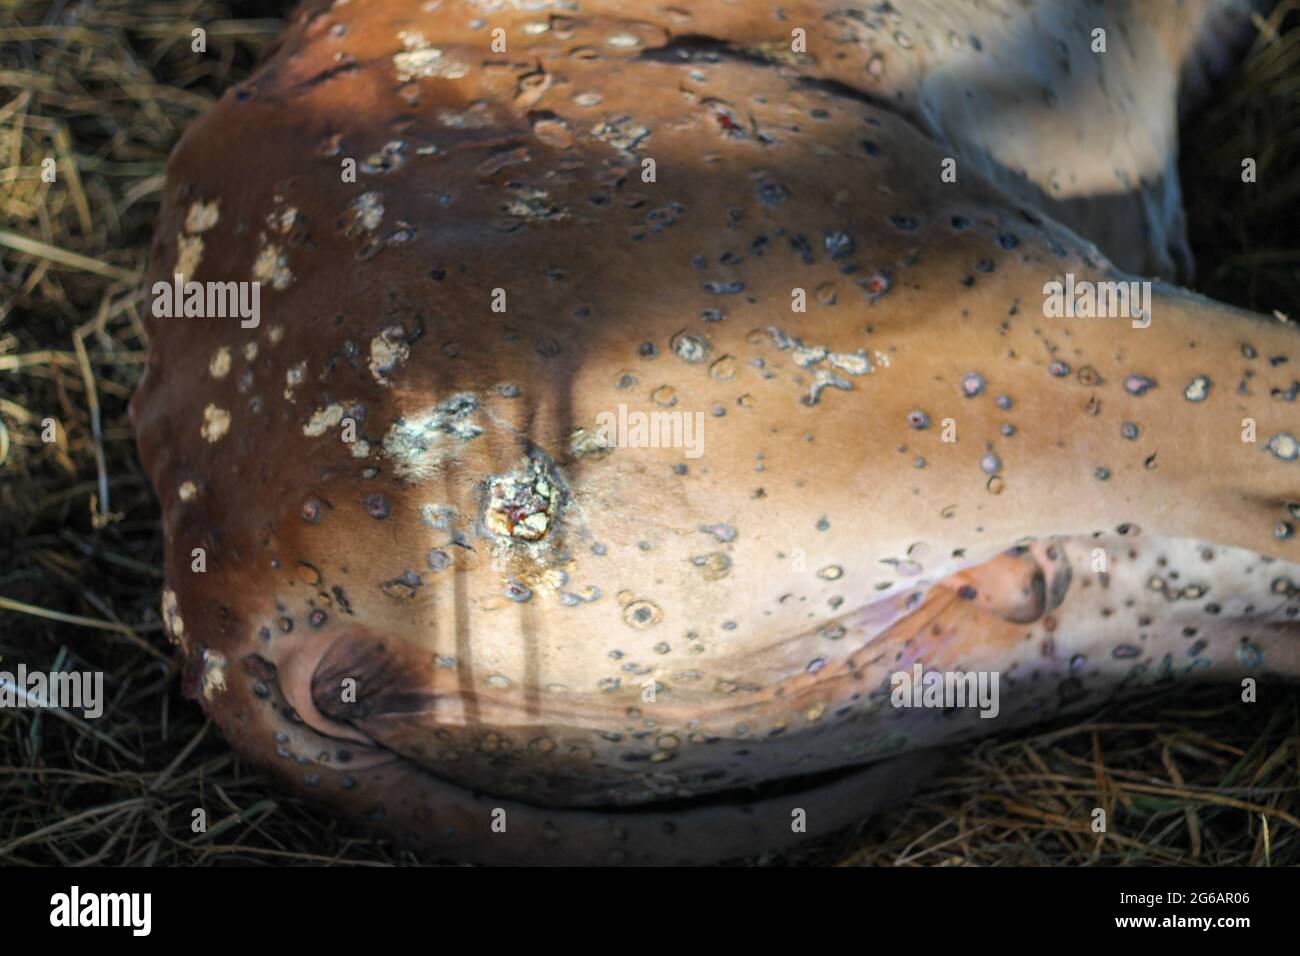 Lumpy skin disease . The calf has Lumpy skin disease, causing lesions of the skin all over the body. Lumpy skin disease is cattle plague. Stock Photo